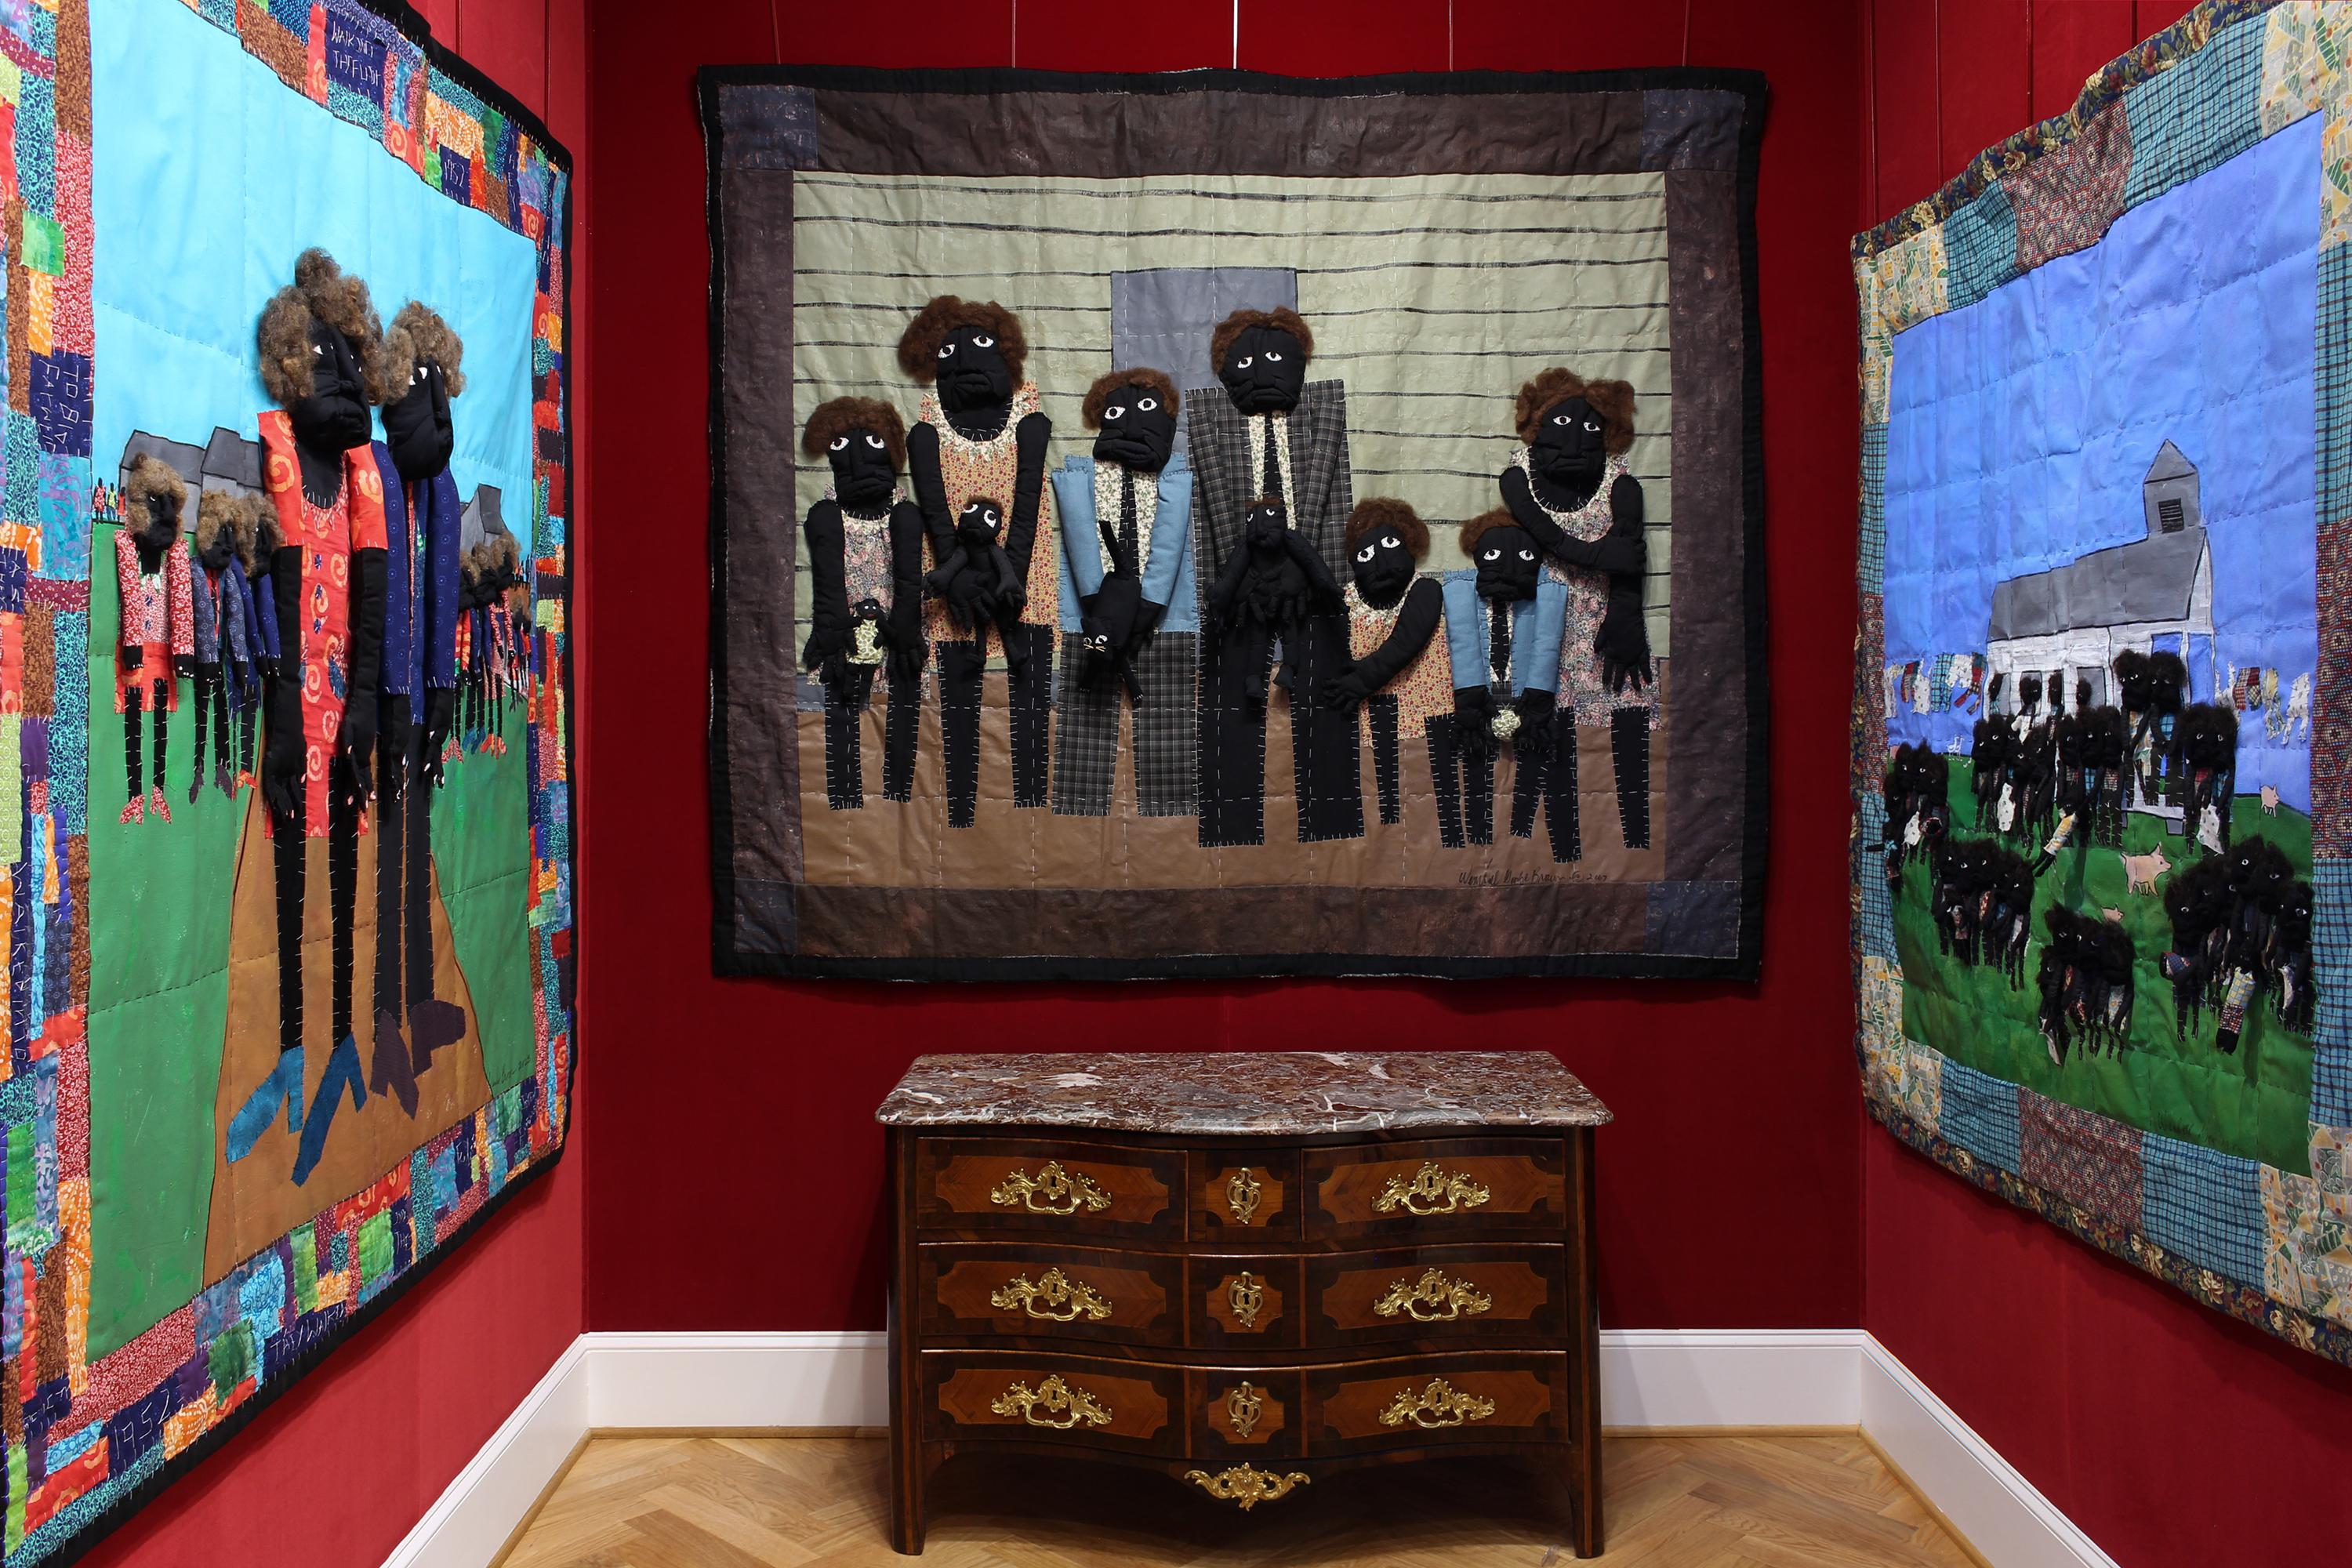 Columbia, South Carolina-based artist, Wendell George Brown creates quilts that explore the traditions of African American quilt-making and Negro Spirituals. After finding a hymnal book that belonged to his maternal grandmother, “Everlasting Life is